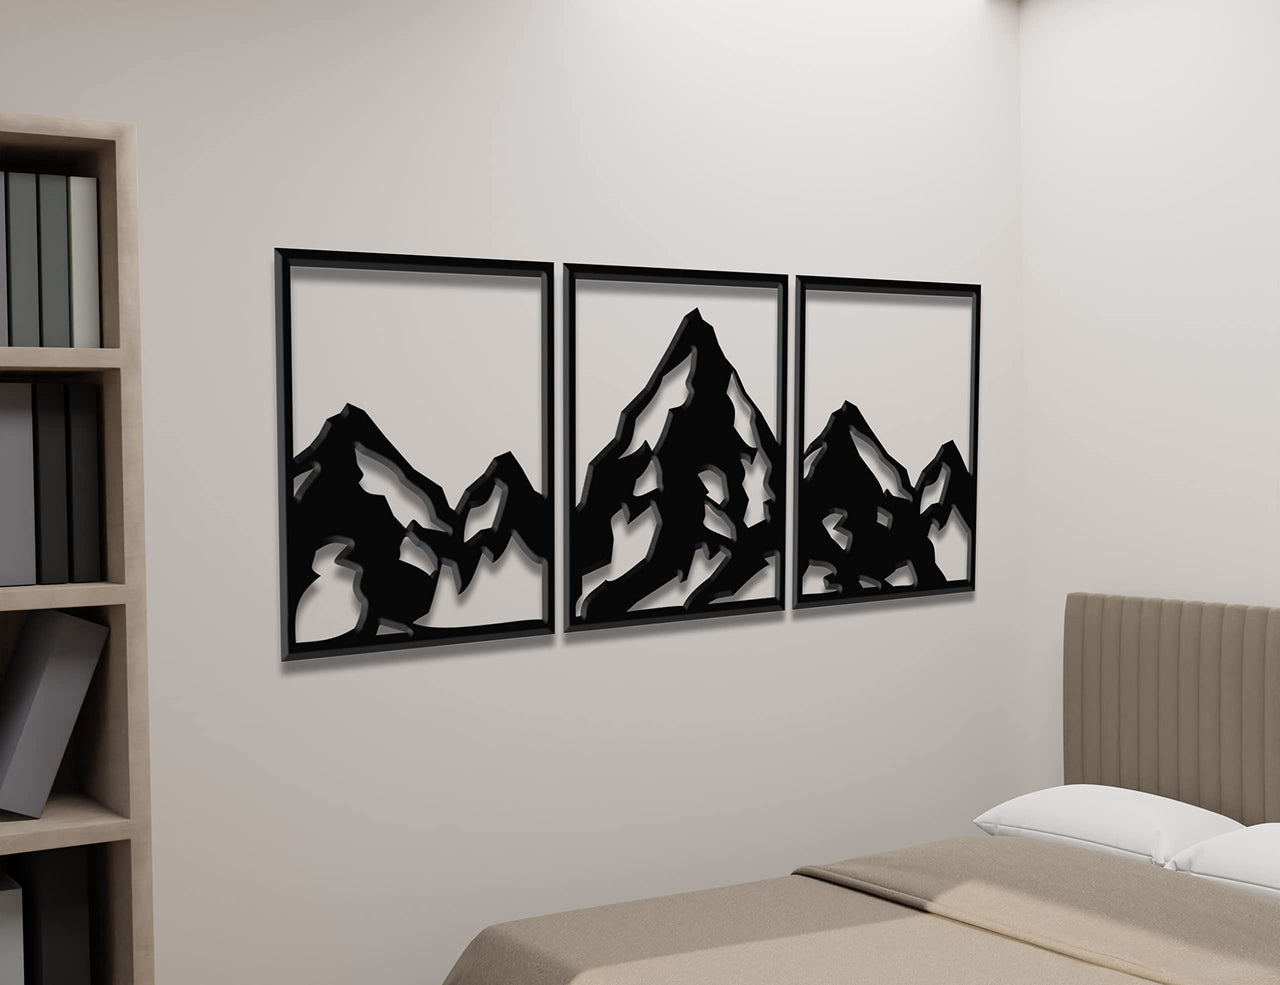 Large Mountain Wall Art 3 Piece - Abstract Mountain Wall Decor - Mountain Canvas Wall - Mountain Decor for Office - Snowy Mountain Wall Art - Rust Free Outdoor & Indoor Wall Decoration Piece